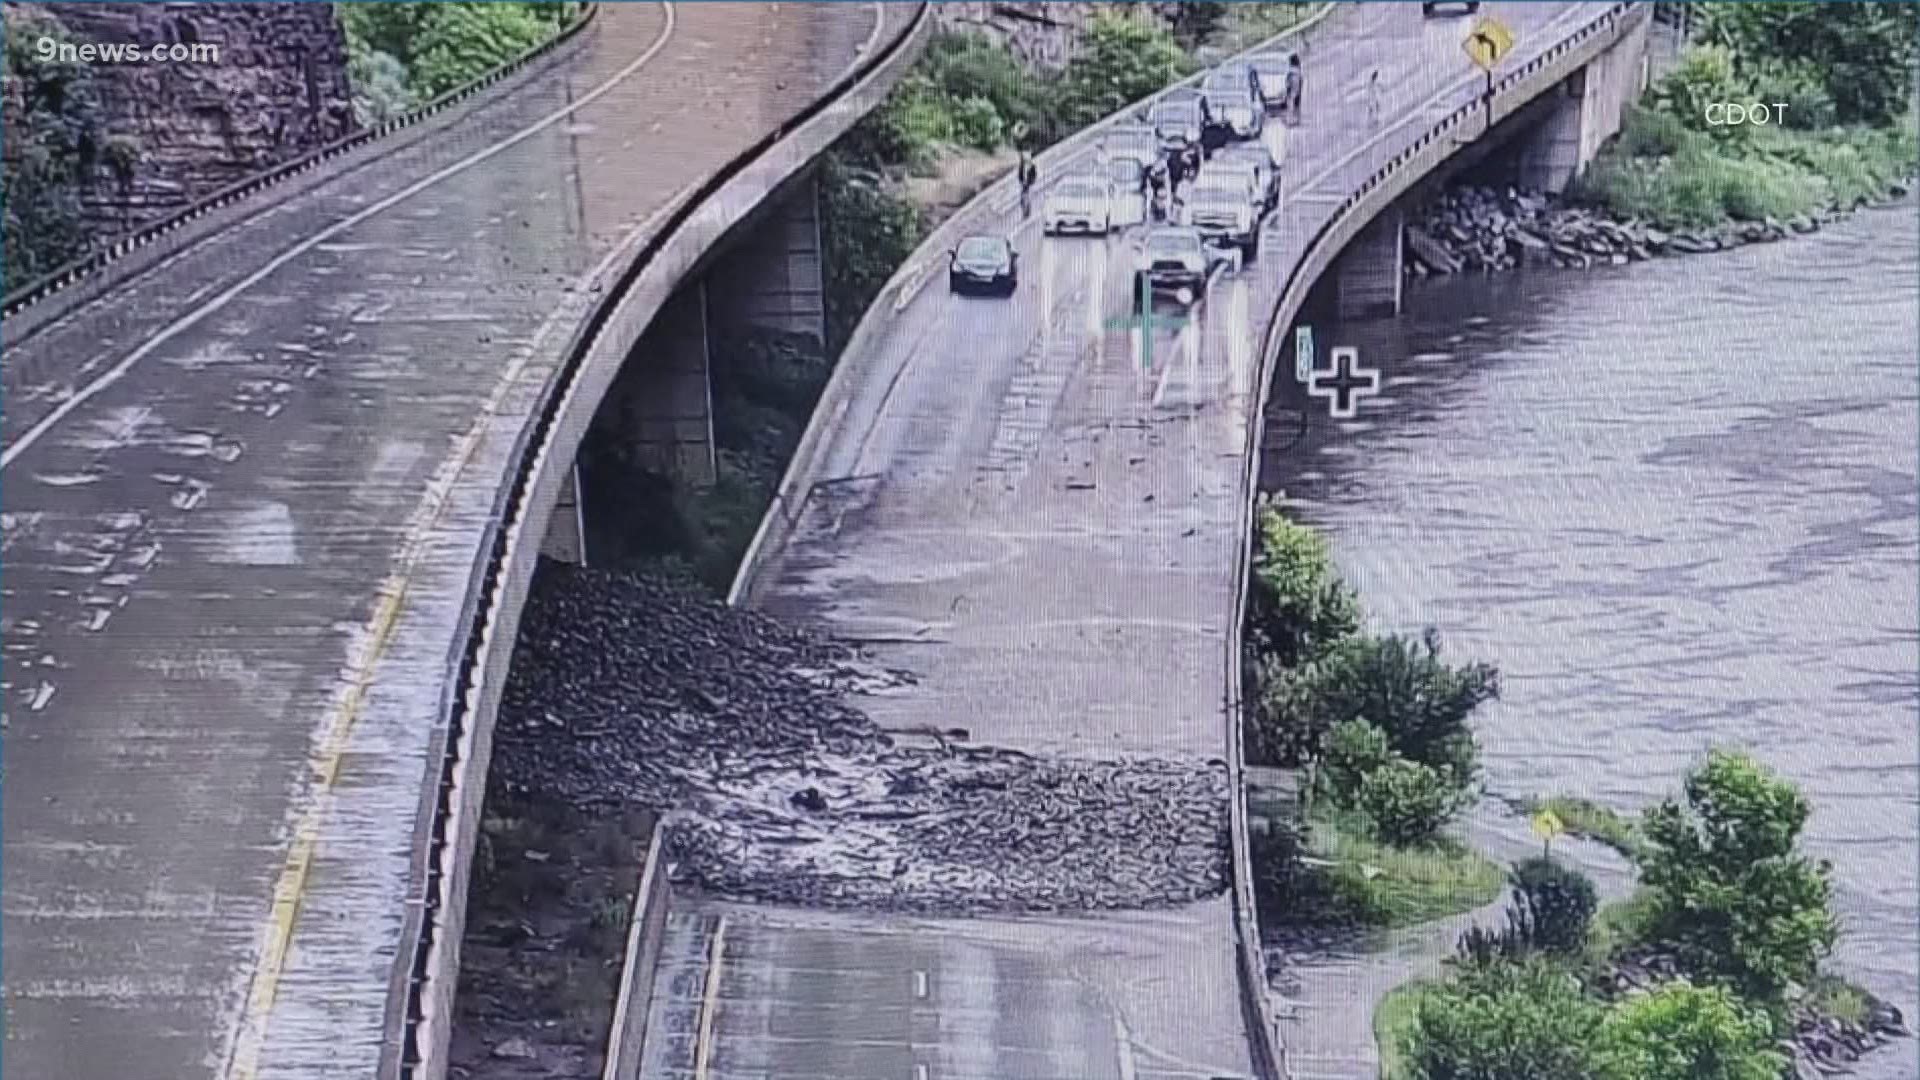 CDOT said there were a total of five mudslides on I-70 Saturday.